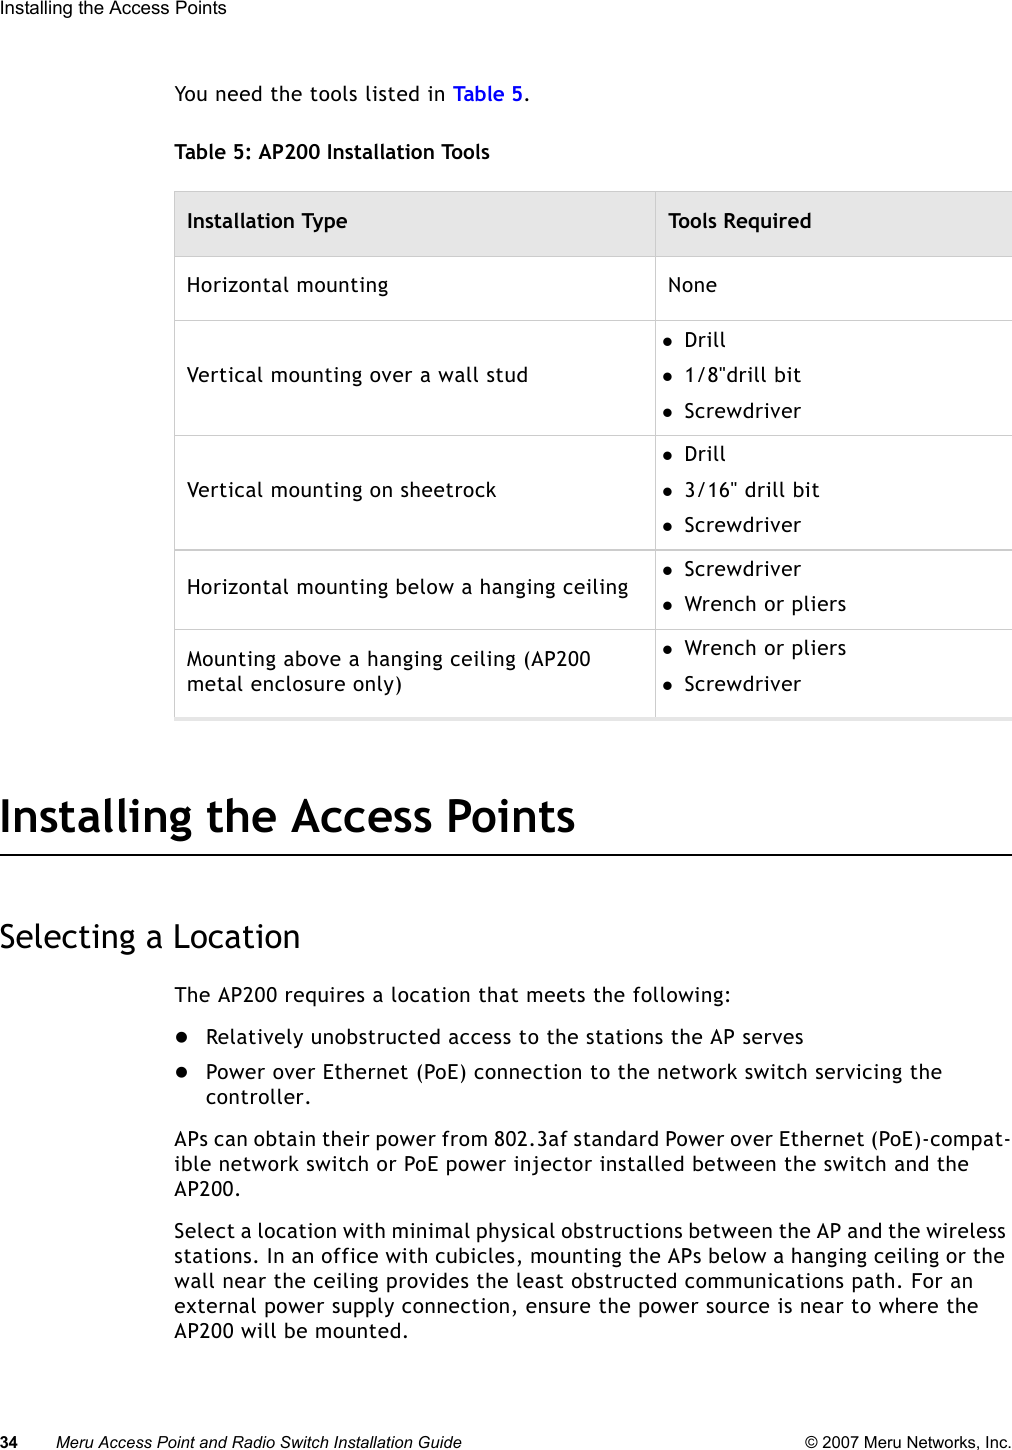 34 Meru Access Point and Radio Switch Installation Guide © 2007 Meru Networks, Inc.Installing the Access Points You need the tools listed in Tab le  5 .Table 5: AP200 Installation ToolsInstalling the Access PointsSelecting a LocationThe AP200 requires a location that meets the following:zRelatively unobstructed access to the stations the AP serveszPower over Ethernet (PoE) connection to the network switch servicing the controller.APs can obtain their power from 802.3af standard Power over Ethernet (PoE)-compat-ible network switch or PoE power injector installed between the switch and the AP200. Select a location with minimal physical obstructions between the AP and the wireless stations. In an office with cubicles, mounting the APs below a hanging ceiling or the wall near the ceiling provides the least obstructed communications path. For an external power supply connection, ensure the power source is near to where the AP200 will be mounted.Installation Type Tools RequiredHorizontal mounting NoneVertical mounting over a wall studzDrill z1/8&quot;drill bitzScrewdriverVertical mounting on sheetrockzDrillz3/16&quot; drill bitzScrewdriverHorizontal mounting below a hanging ceiling zScrewdriverzWrench or pliersMounting above a hanging ceiling (AP200 metal enclosure only)zWrench or plierszScrewdriver